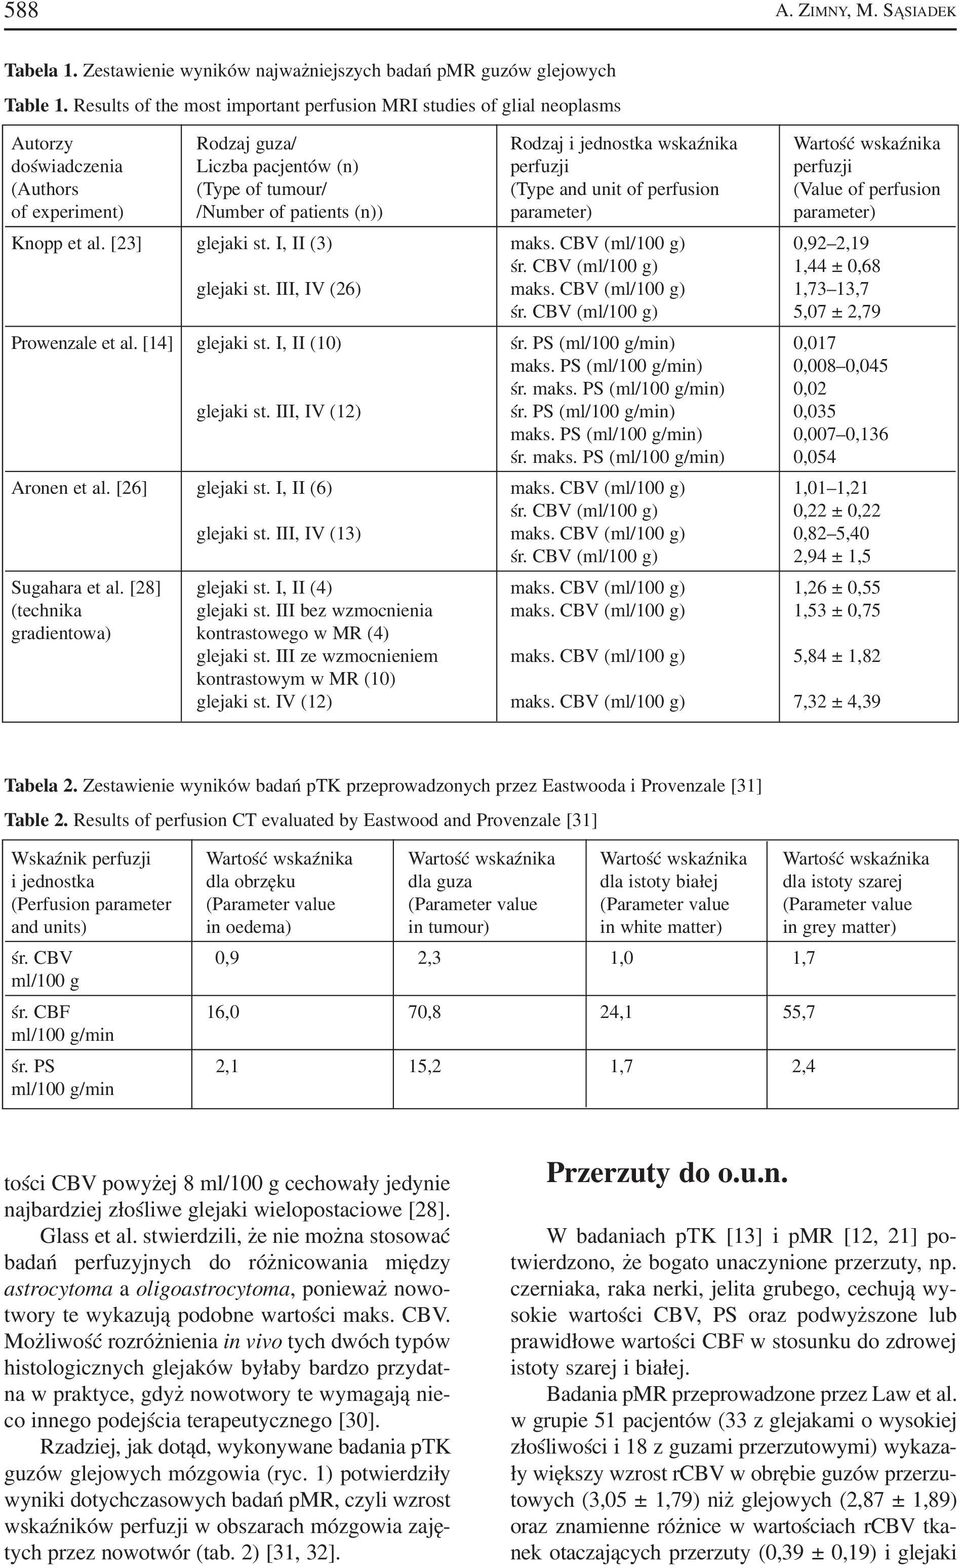 (Authors (Type of tumour/ (Type and unit of perfusion (Value of perfusion of experiment) /Number of patients (n)) parameter) parameter) Knopp et al. [23] glejaki st. I, II (3) maks.